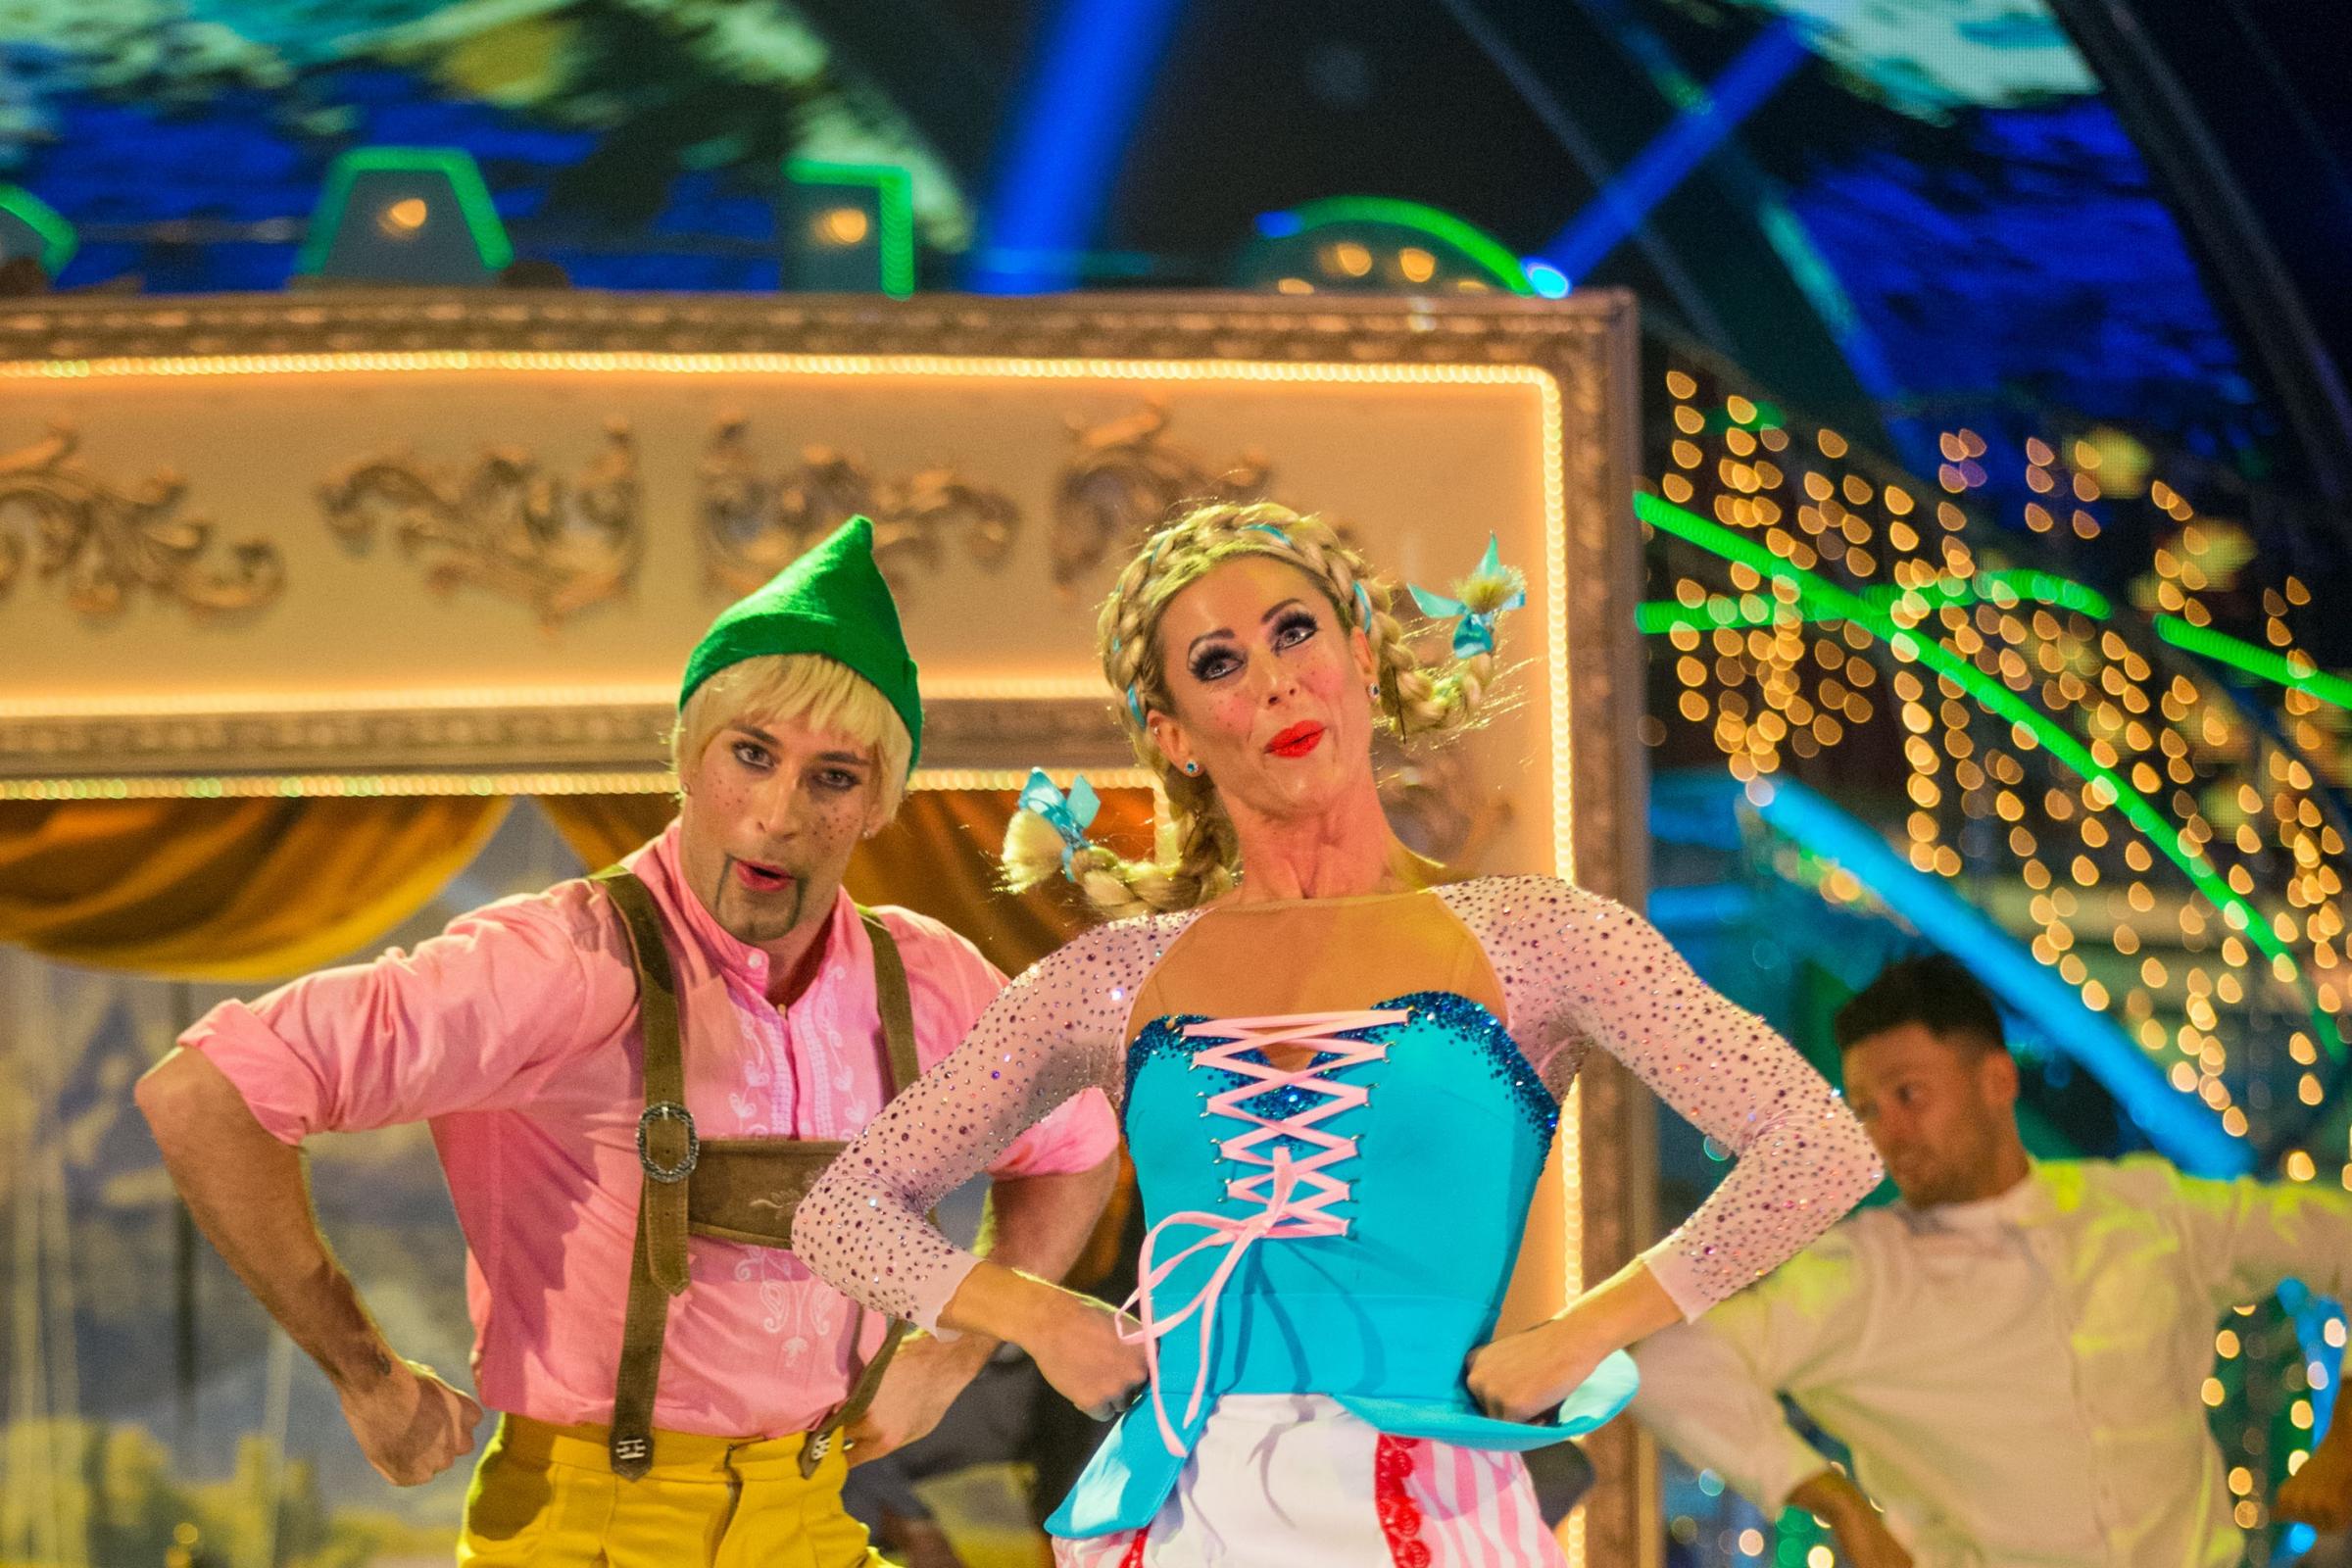 Faye Tozer tops Strictly leaderboard for second week running with perfect score